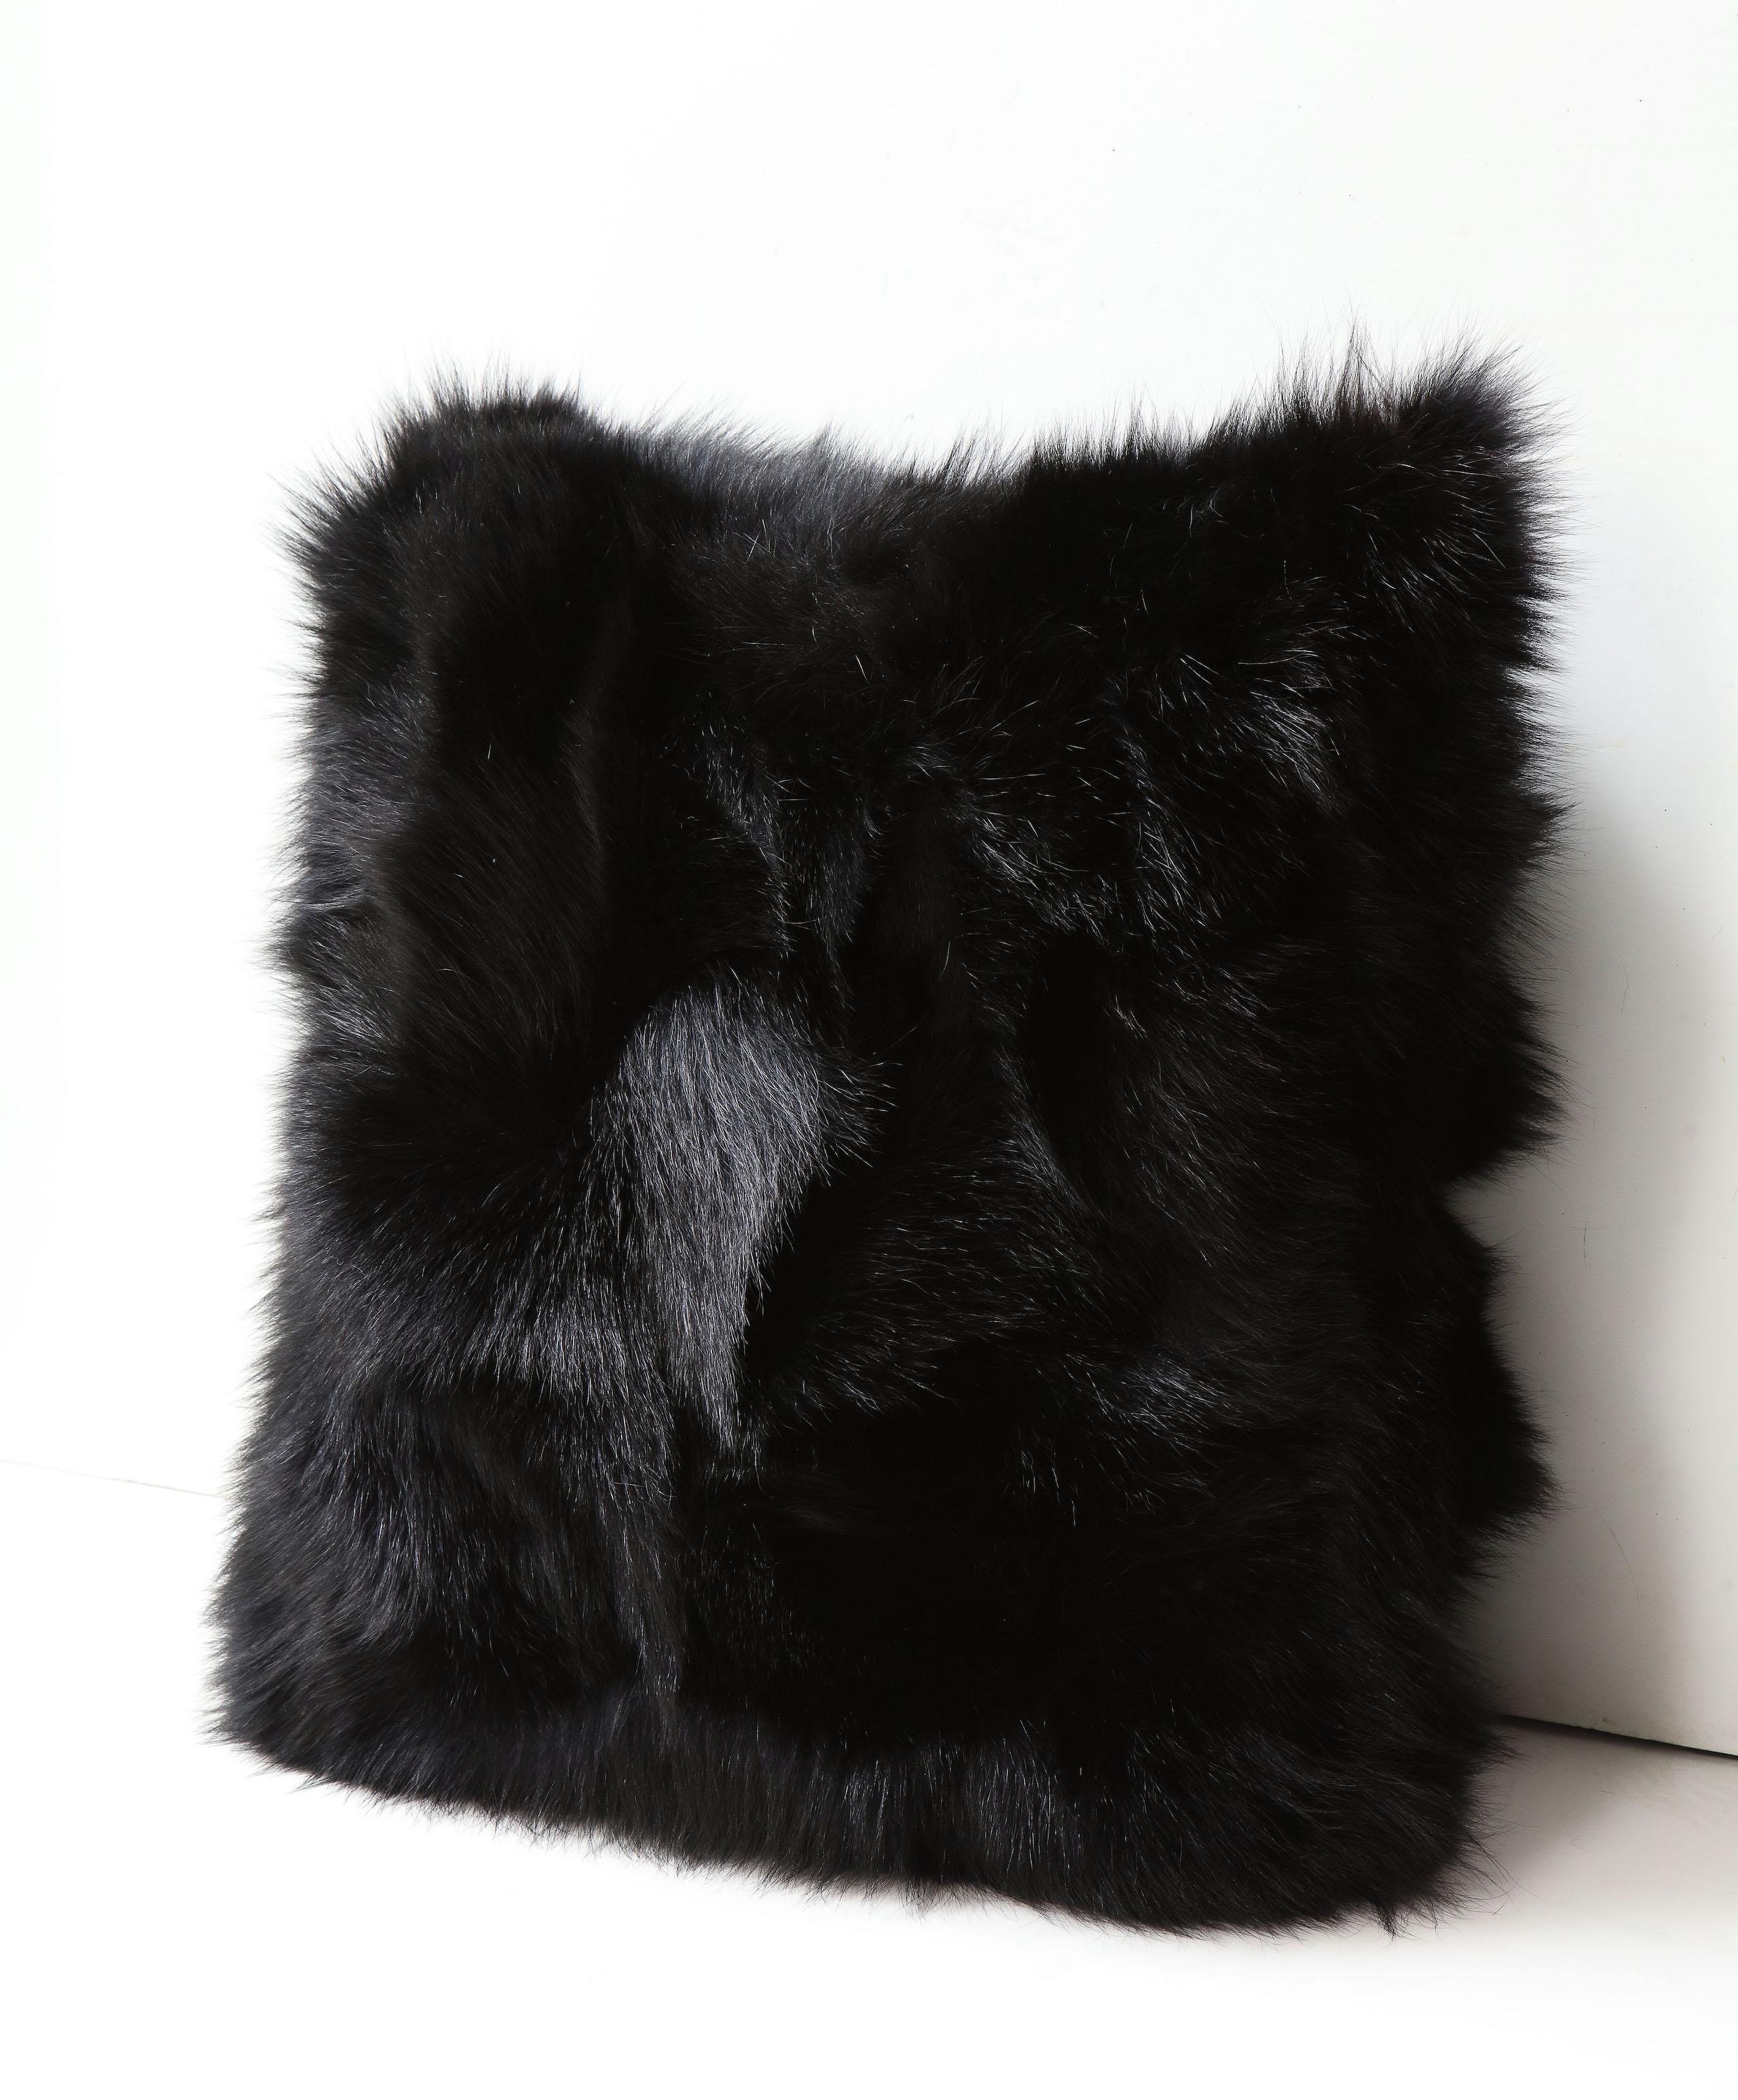 Beautiful double sided long hair Toscana shearling pillow in black color. Very elegant in look and tangibly luxurious and soft. It is made of genuine shearing with a zipper enclosure in a matching color, filled with down and feather, and 18